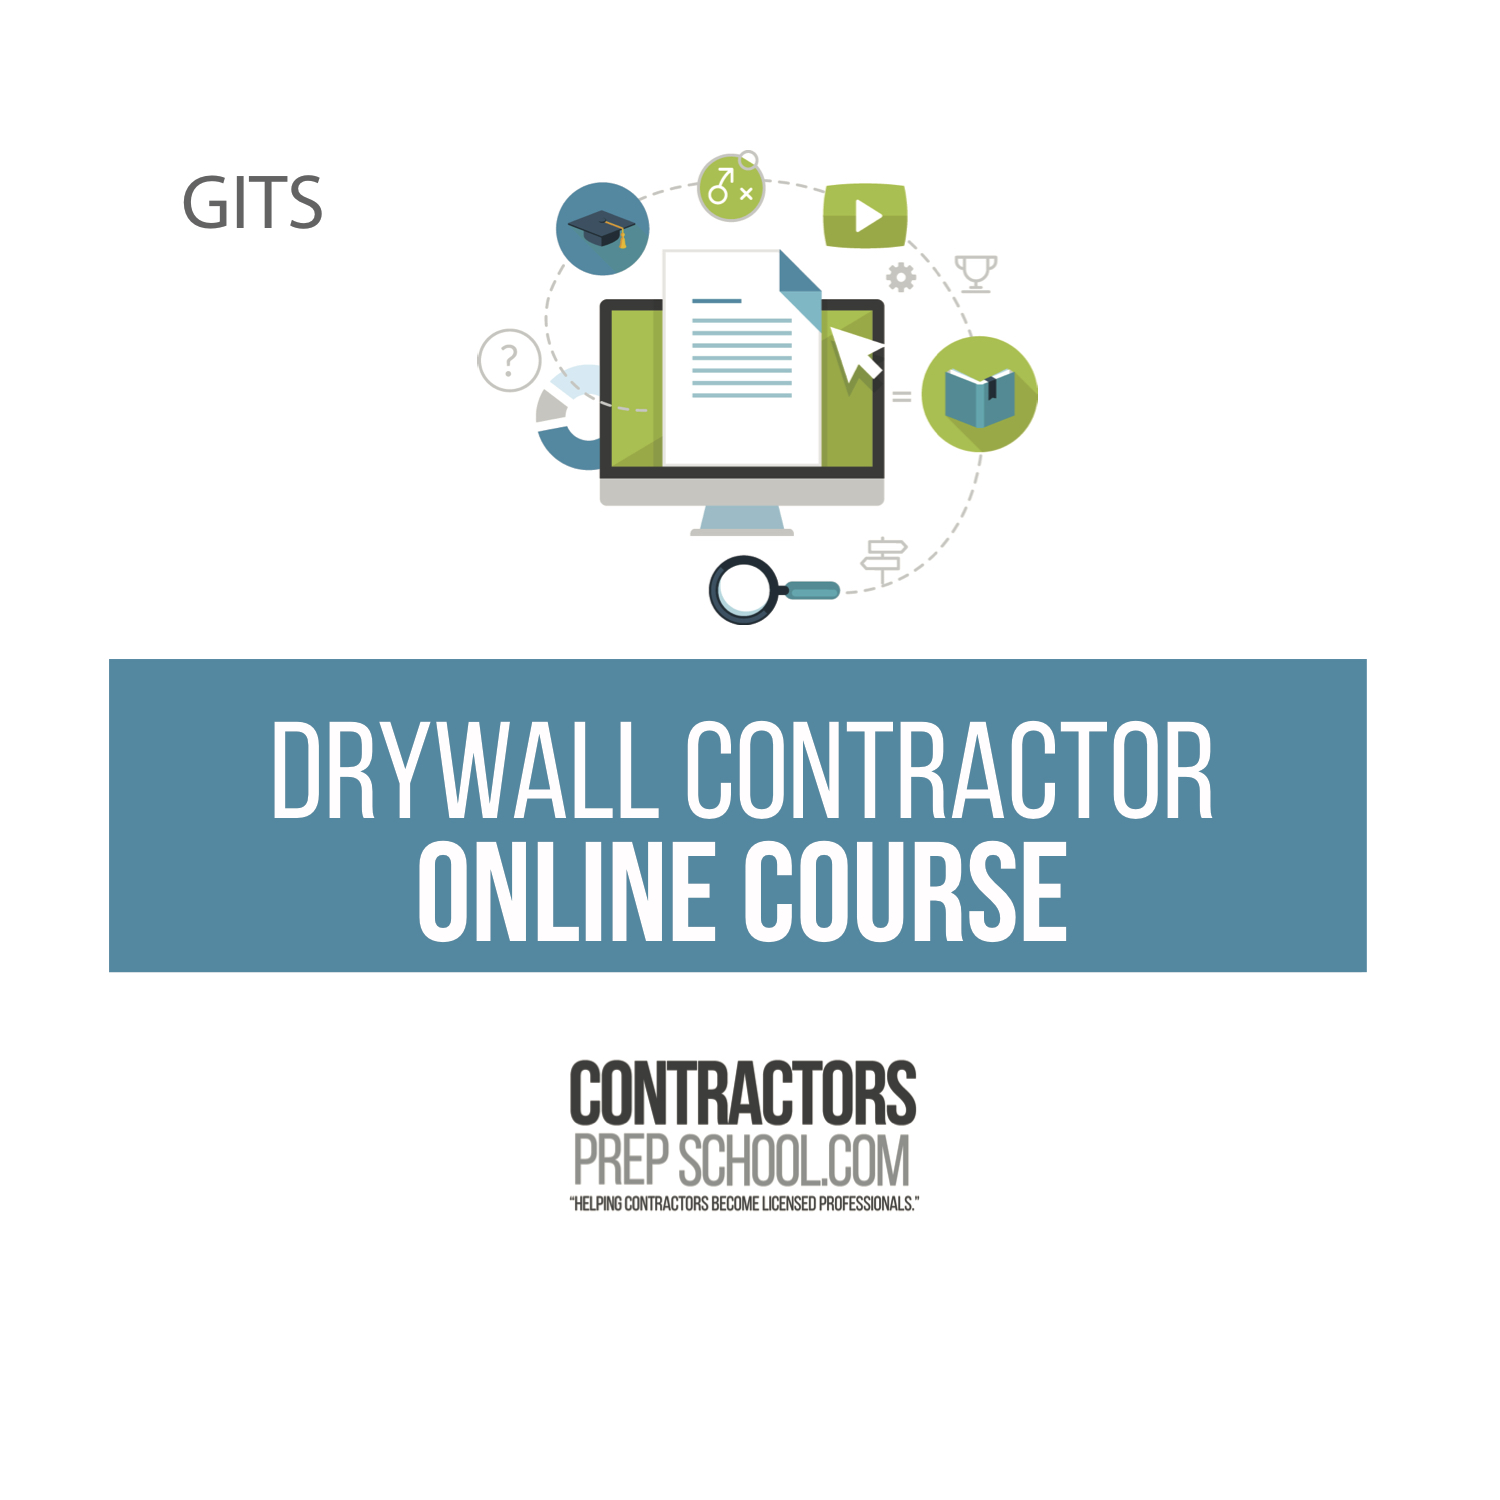 Gits Drywall And Lathing Online Course Contractors Prep School